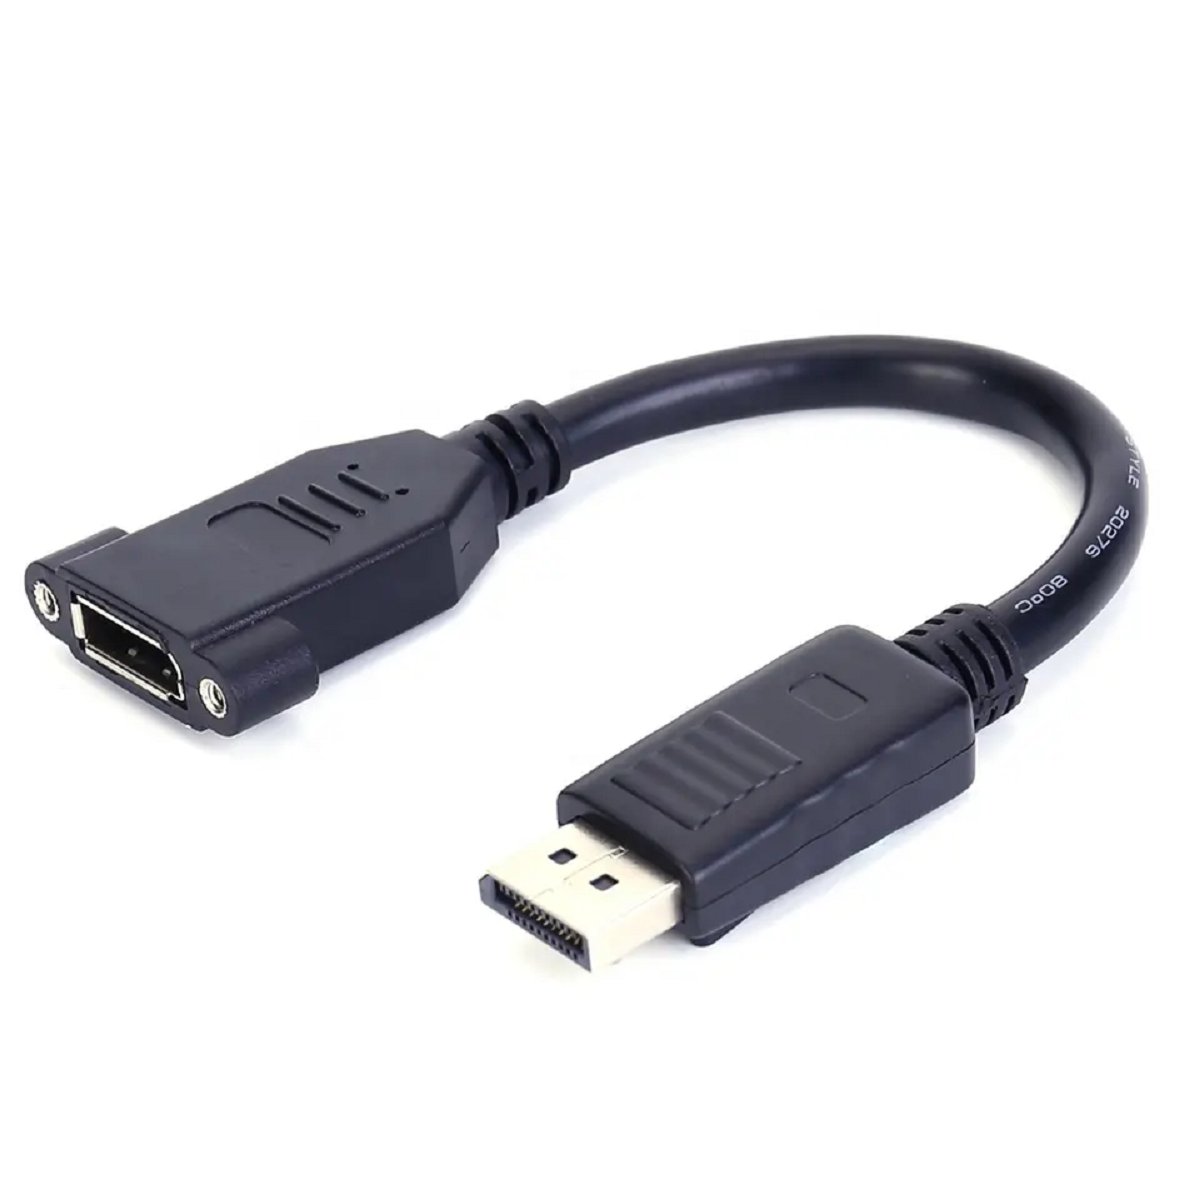 82 DisplayPort Male to Female cable with screw nut locking